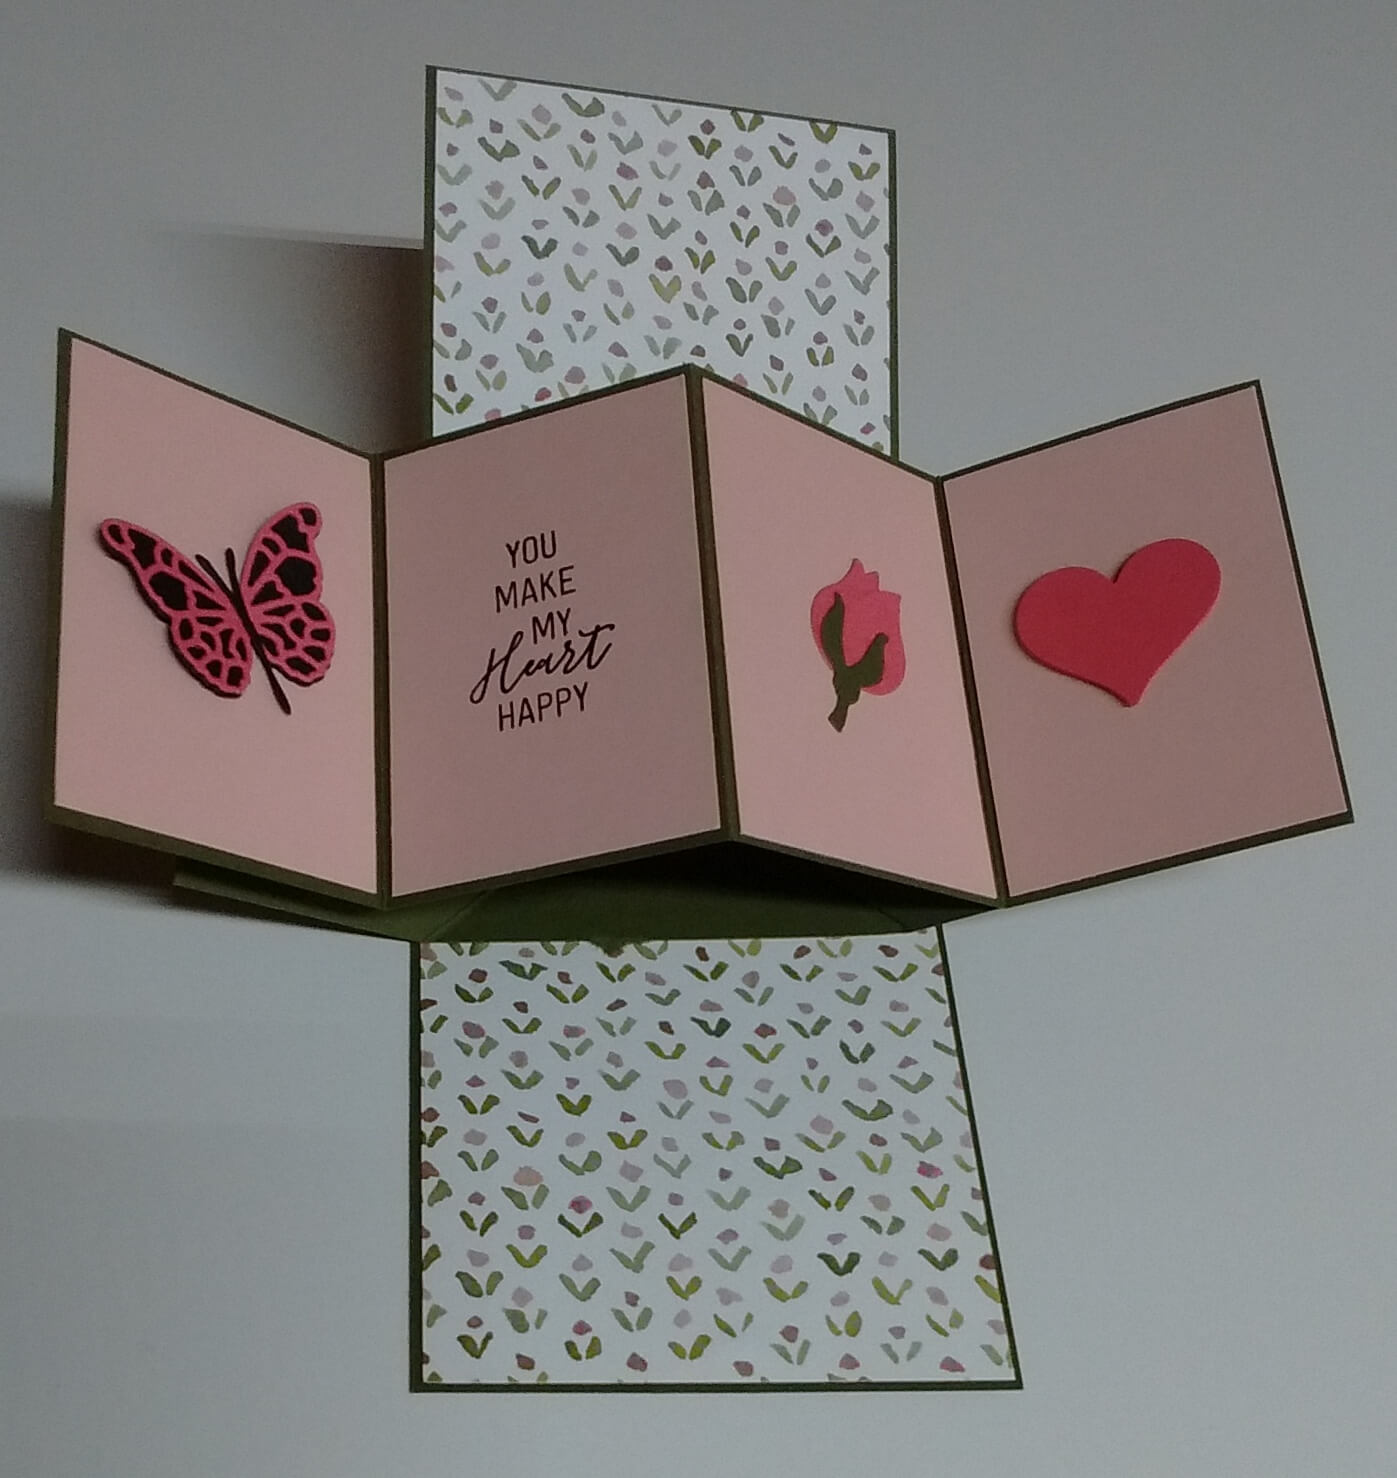 017 84614 10951579724 9338E5D5 Dca2 4412 9F59 413344C84Caf Pertaining To Pop Up Wedding Card Template Free